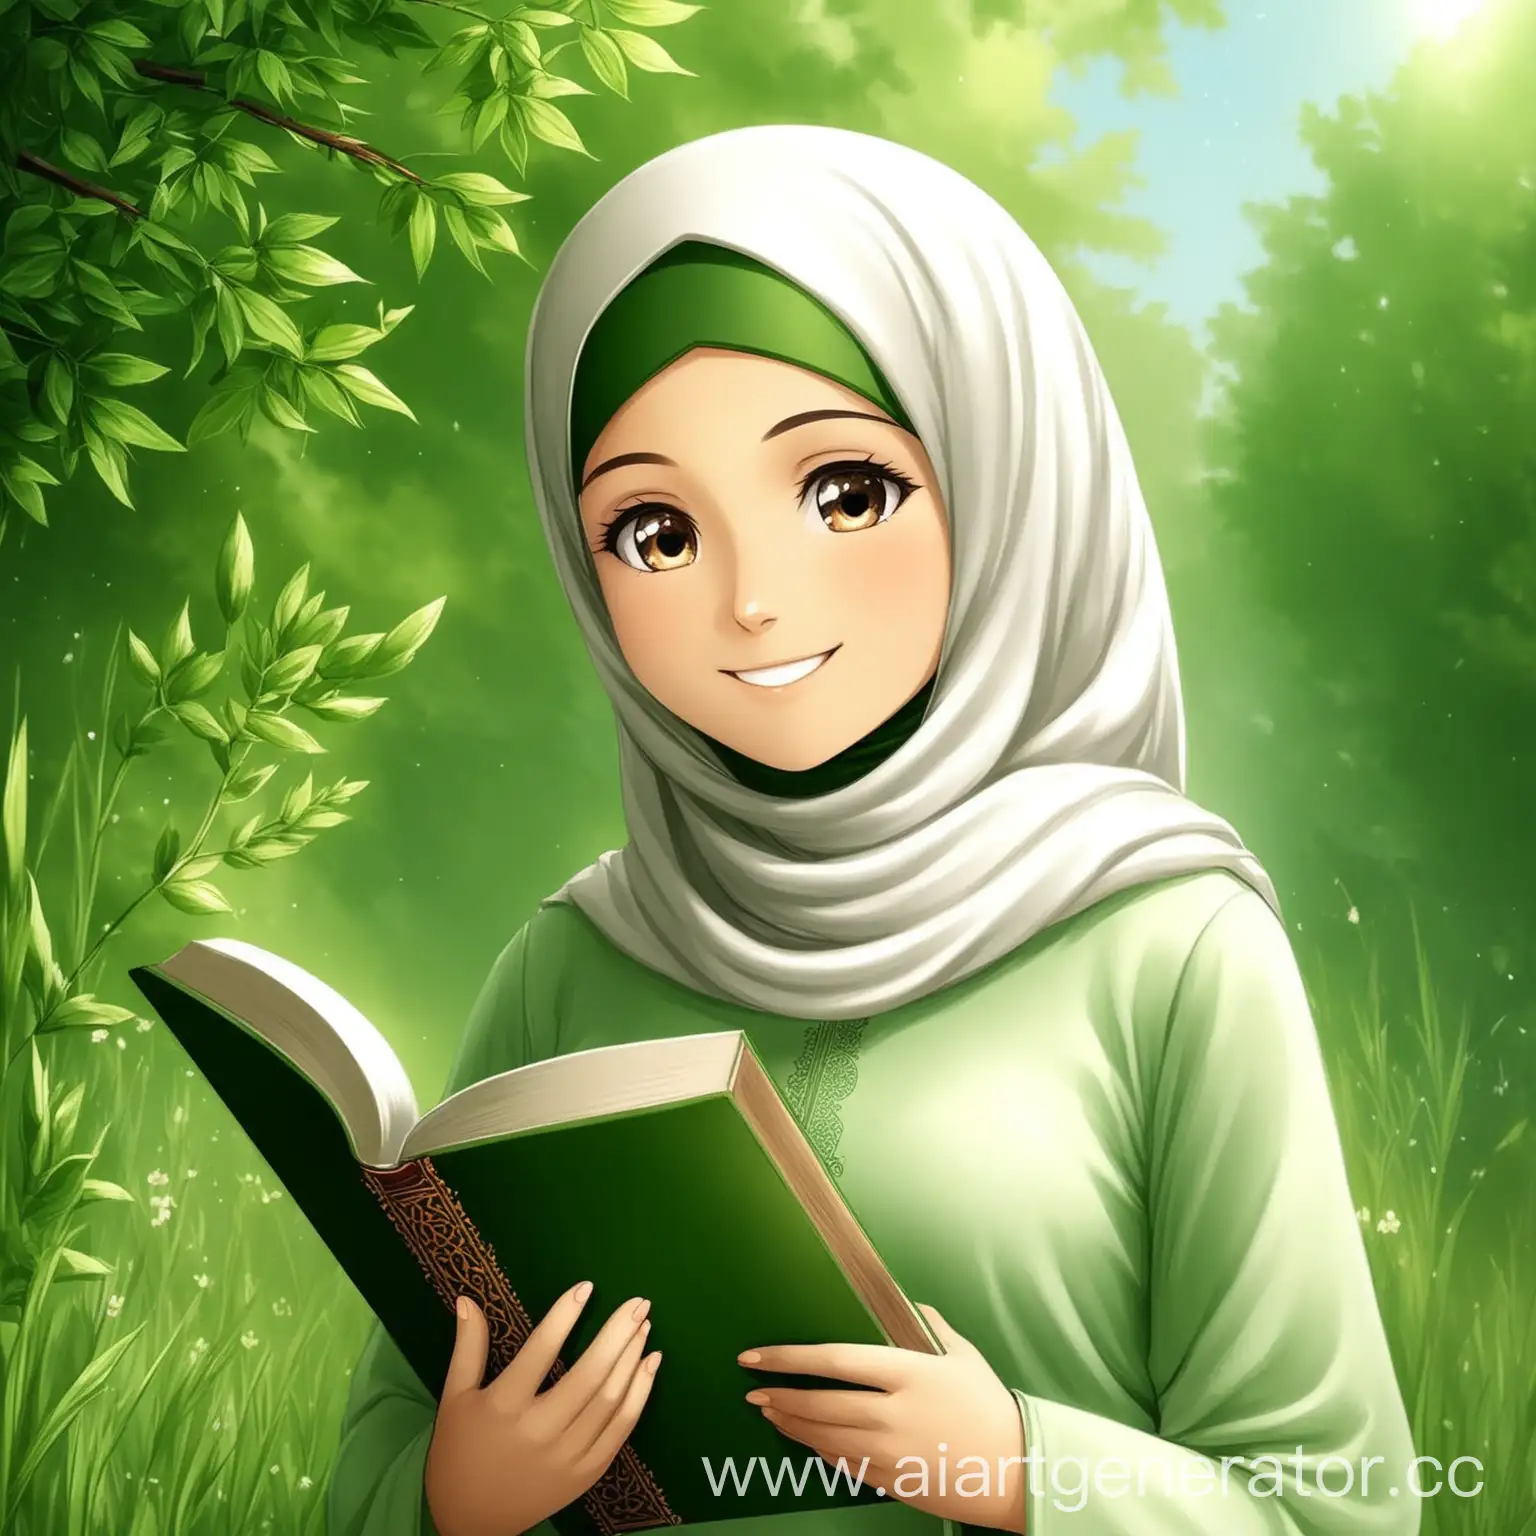 Muslim-Girl-Smiling-in-Nature-While-Holding-a-Book